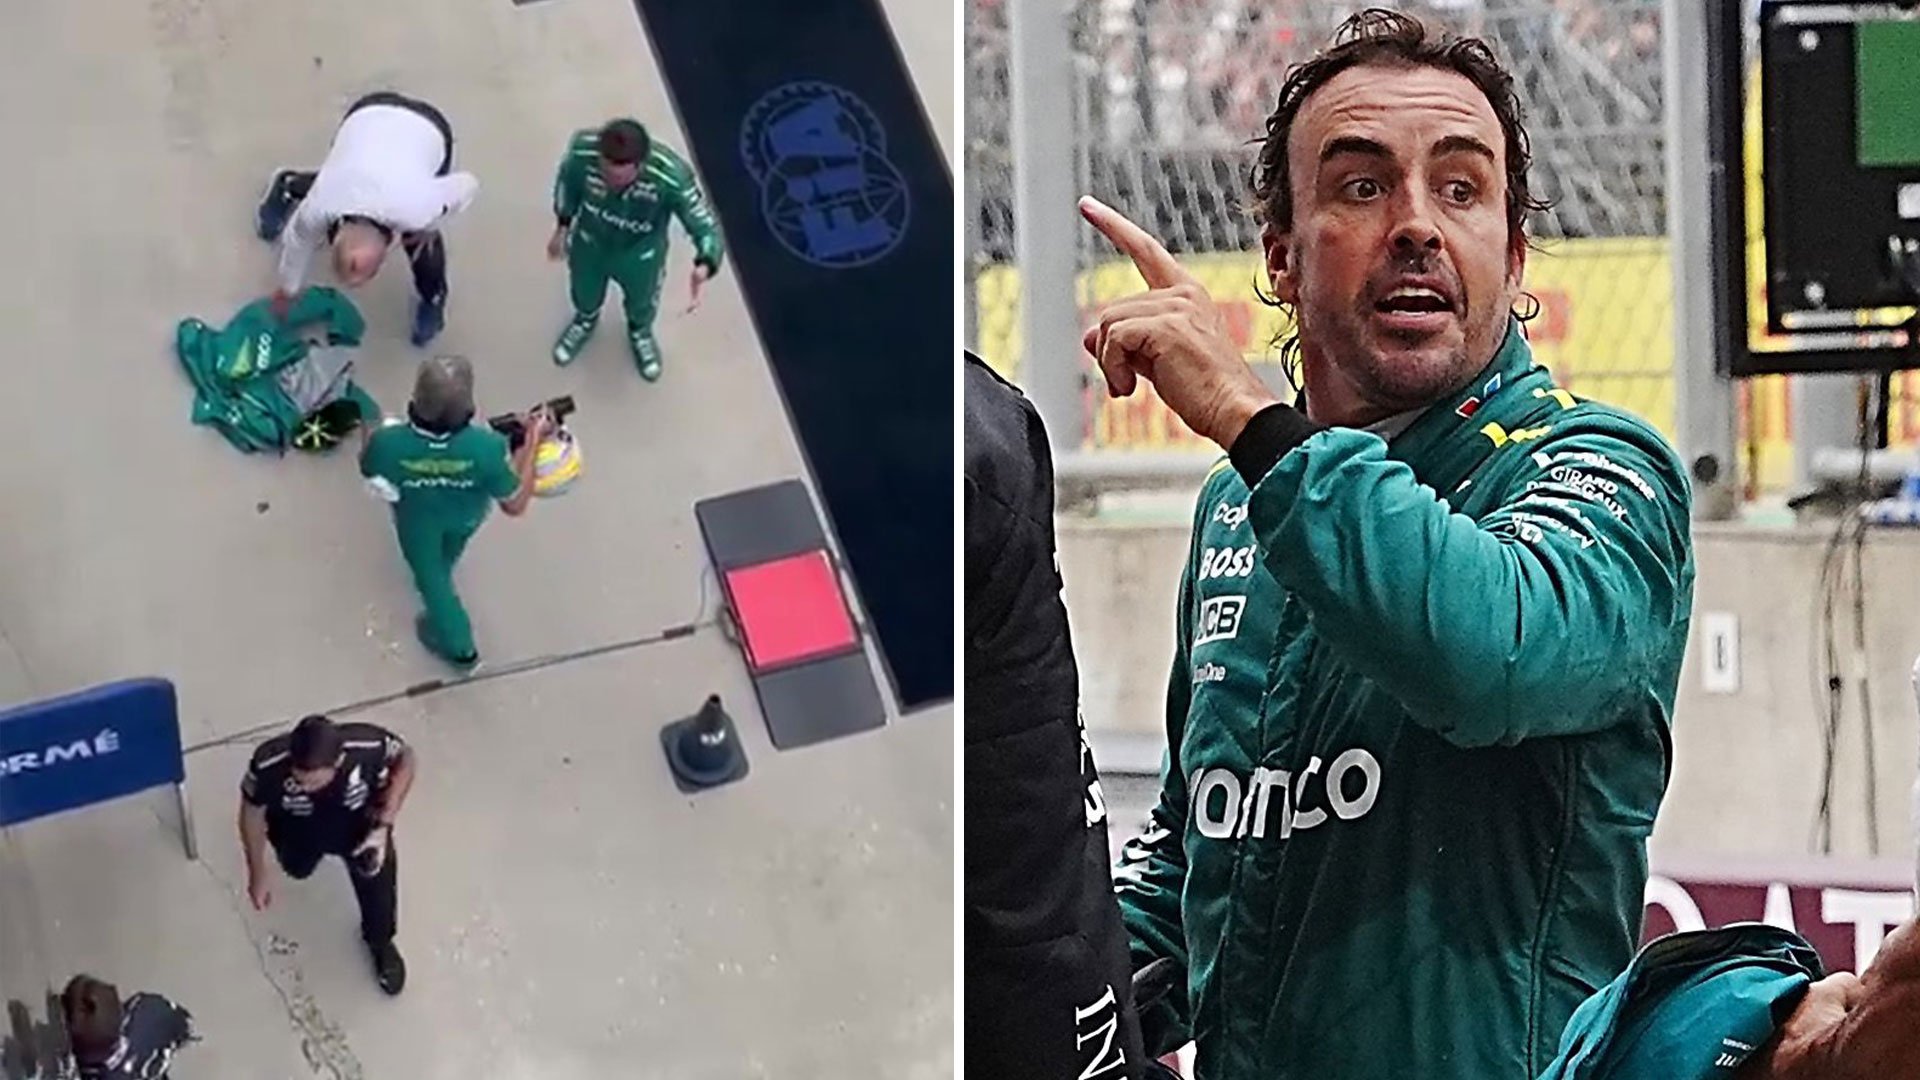 Watch moment furious Fernando Alonso throws jacket to ground in anger after major blunder at Hungarian GP